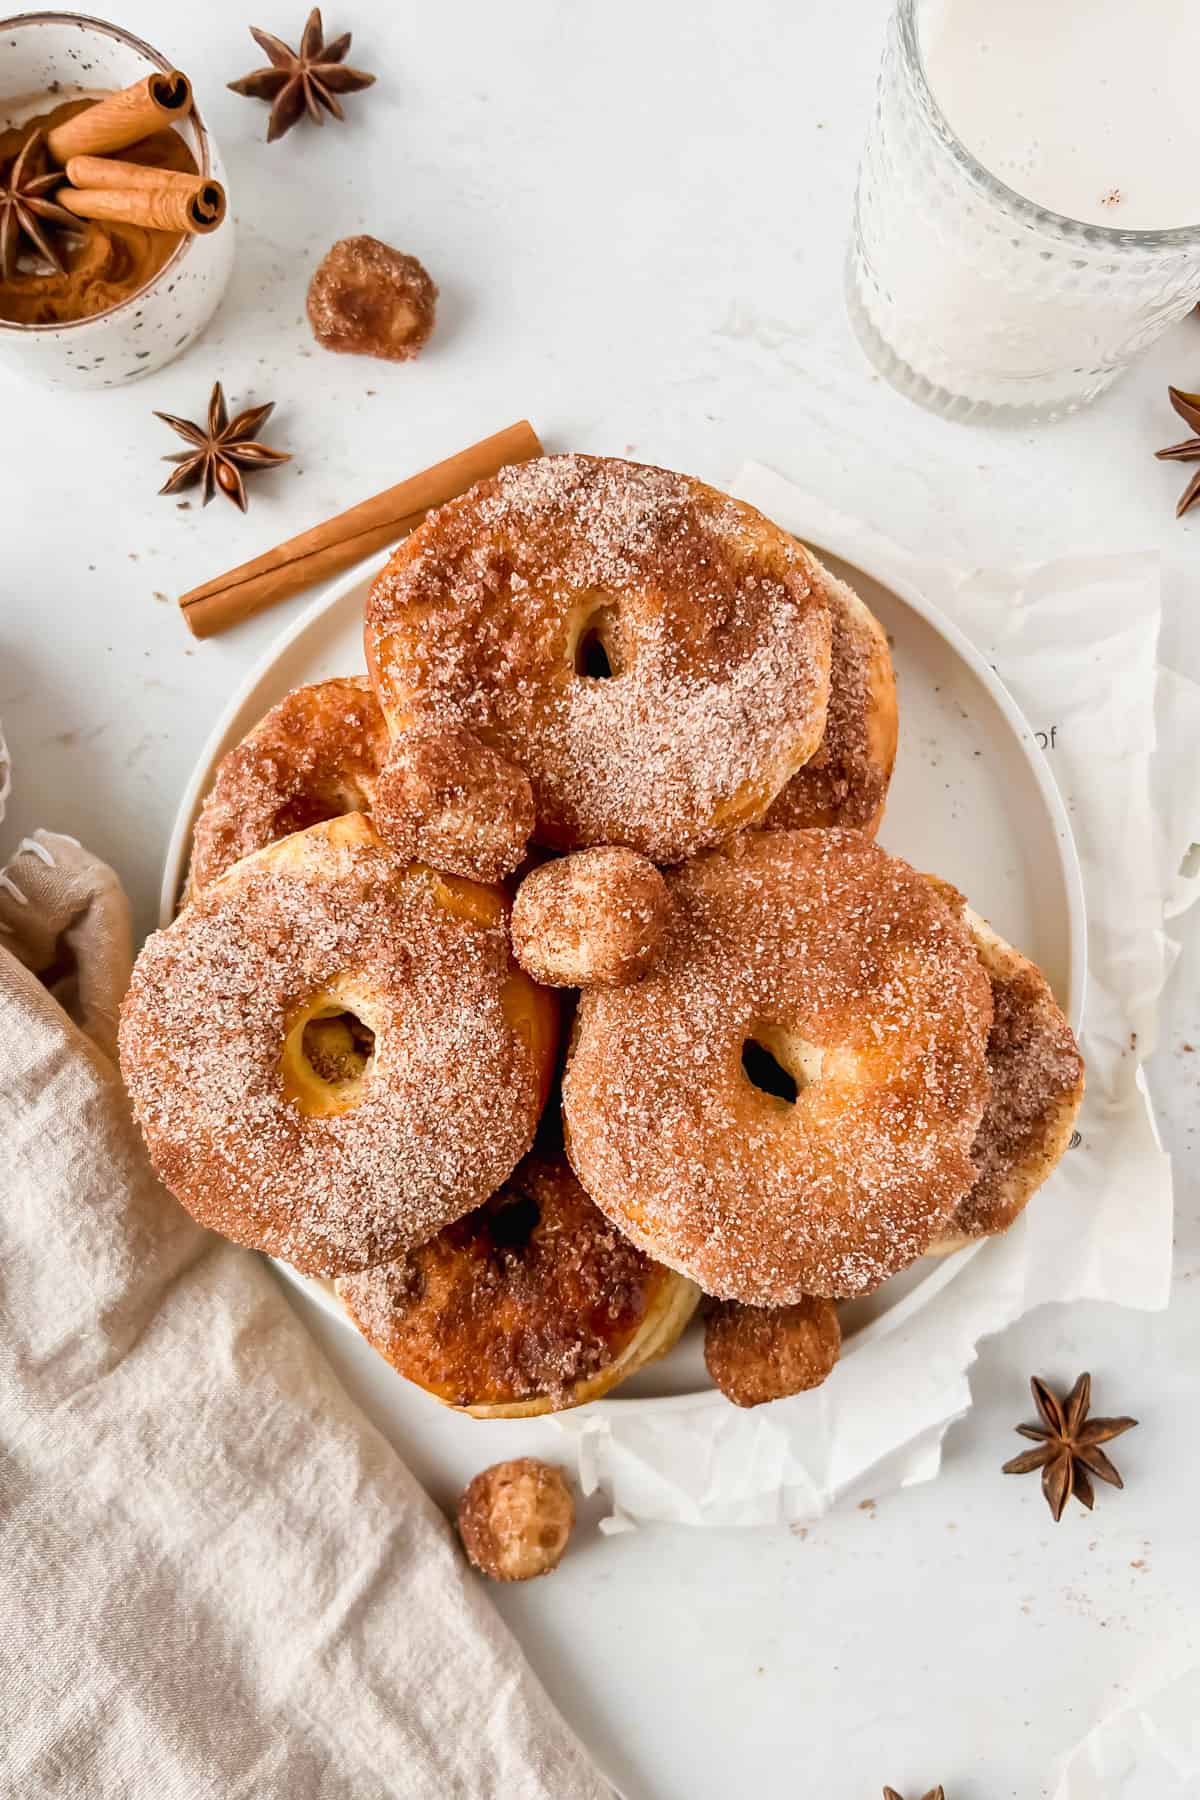 Cinnamon Sugar Air Fryer Donuts (with biscuits) in a bowl garnished with cinnamon sticks.